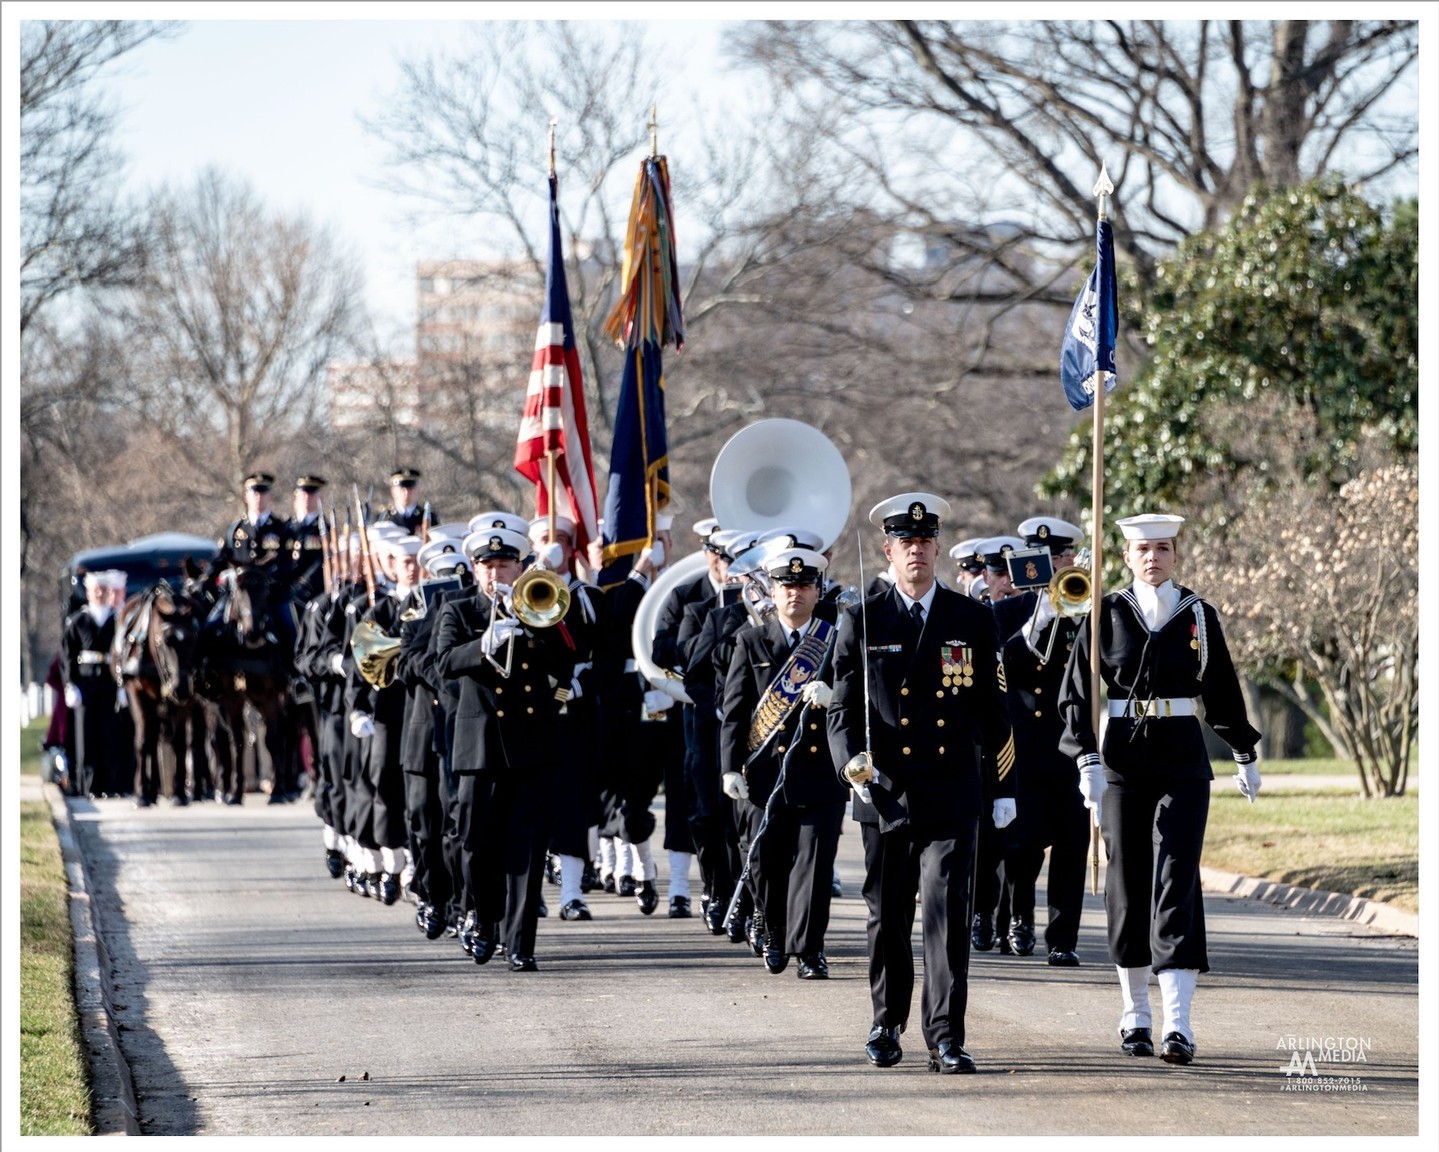 The US Navy band pictured leading a procession in Arlington National Cemetery during a full honors funeral.

Full honors funerals are for commissioned officers, warrant officers and senior non-commissioned officers (pay grade E-9). Full honors includes an escort platoon (size varies according to the rank of the deceased) and a military band pictured here. Normally, the deceased service member’s branch of service is responsible for carrying out the military honors at the funeral. Those eligible for full military honors may also use the caisson if it is available.

The Third Infantry Regiment United States Army, more commonly known as the Old Guard, is always responsible for caisson. Caisson is a horse drawn wagon or cart. The two caissons used at the Cemetery are from the WWI time period circa 1918-1919. Originally the caisson was used to bring artillery onto the battlefield. Once the artillery was off-loaded, the caisson was loaded with bodies of fallen service members. The wagon is pulled by six horses, but there are only three riders. 

The Old Guard service members only ride the horses on the left side because the horses on right side were originally used to take supplies onto the battlefield.

Officers with a rank of colonel or above in the Army and the Marine Corps may have a caparisoned (riderless) horse, if available. The riderless horse follows behind the caisson and is guided by an Old Guard service member. The horse wears an empty saddle with the boots in the stirrups backwards to signify the last ride of the officer.

PC: @arlingtonmedia
Paraphrased content: Arlington Tours